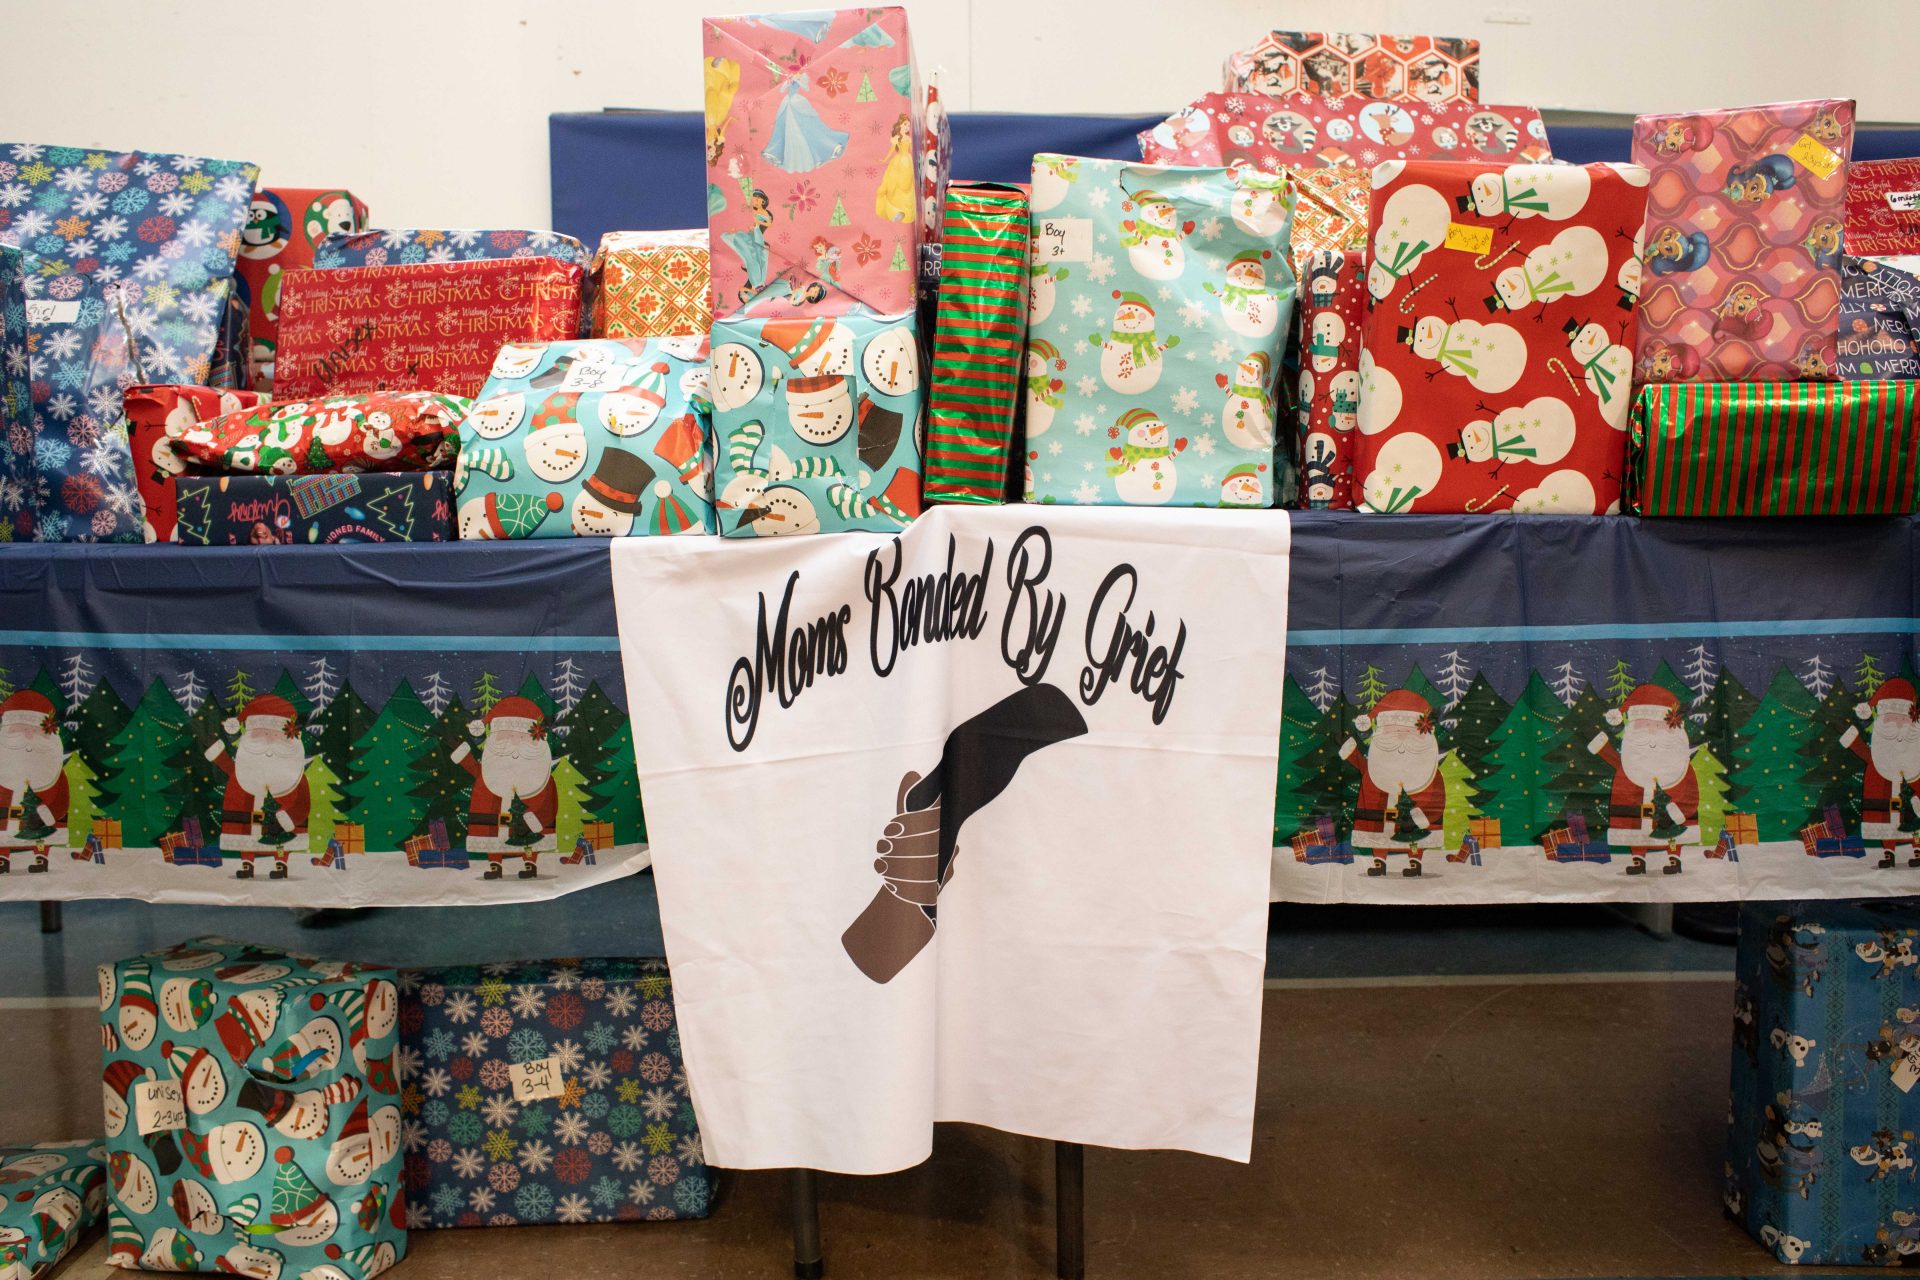 Moms bonded by grief organized Christmas gifts to give to children who have lost a family member to gun violence.